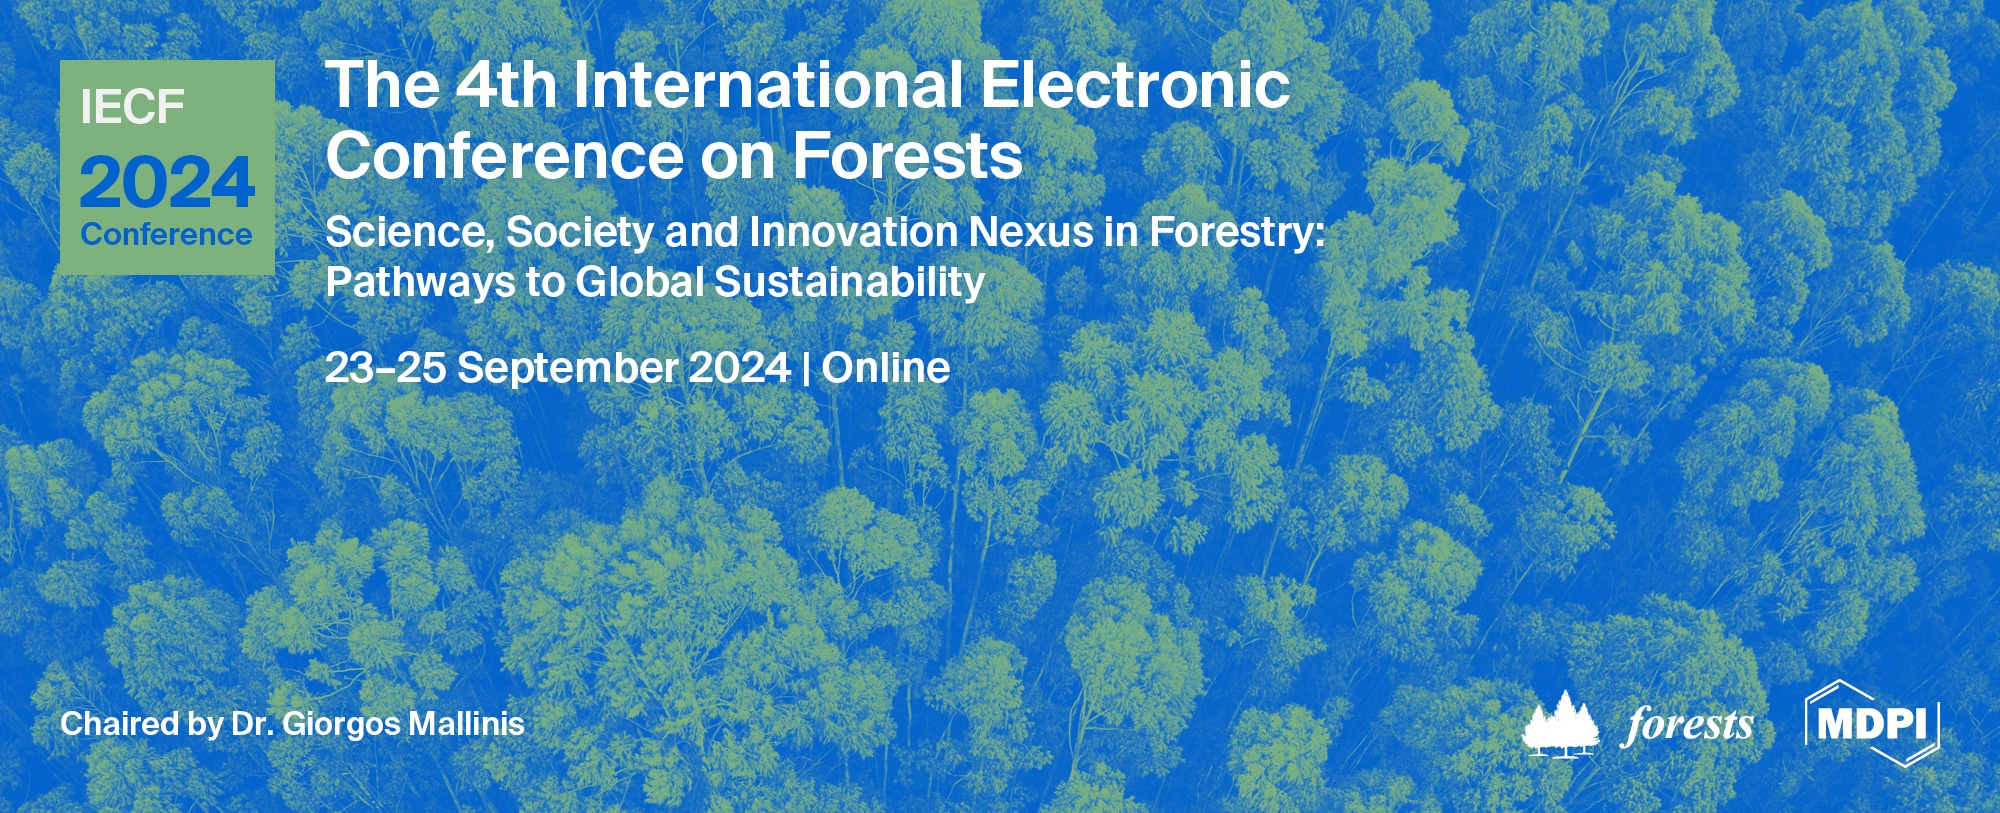 The 4th International Electronic Conference on Forests